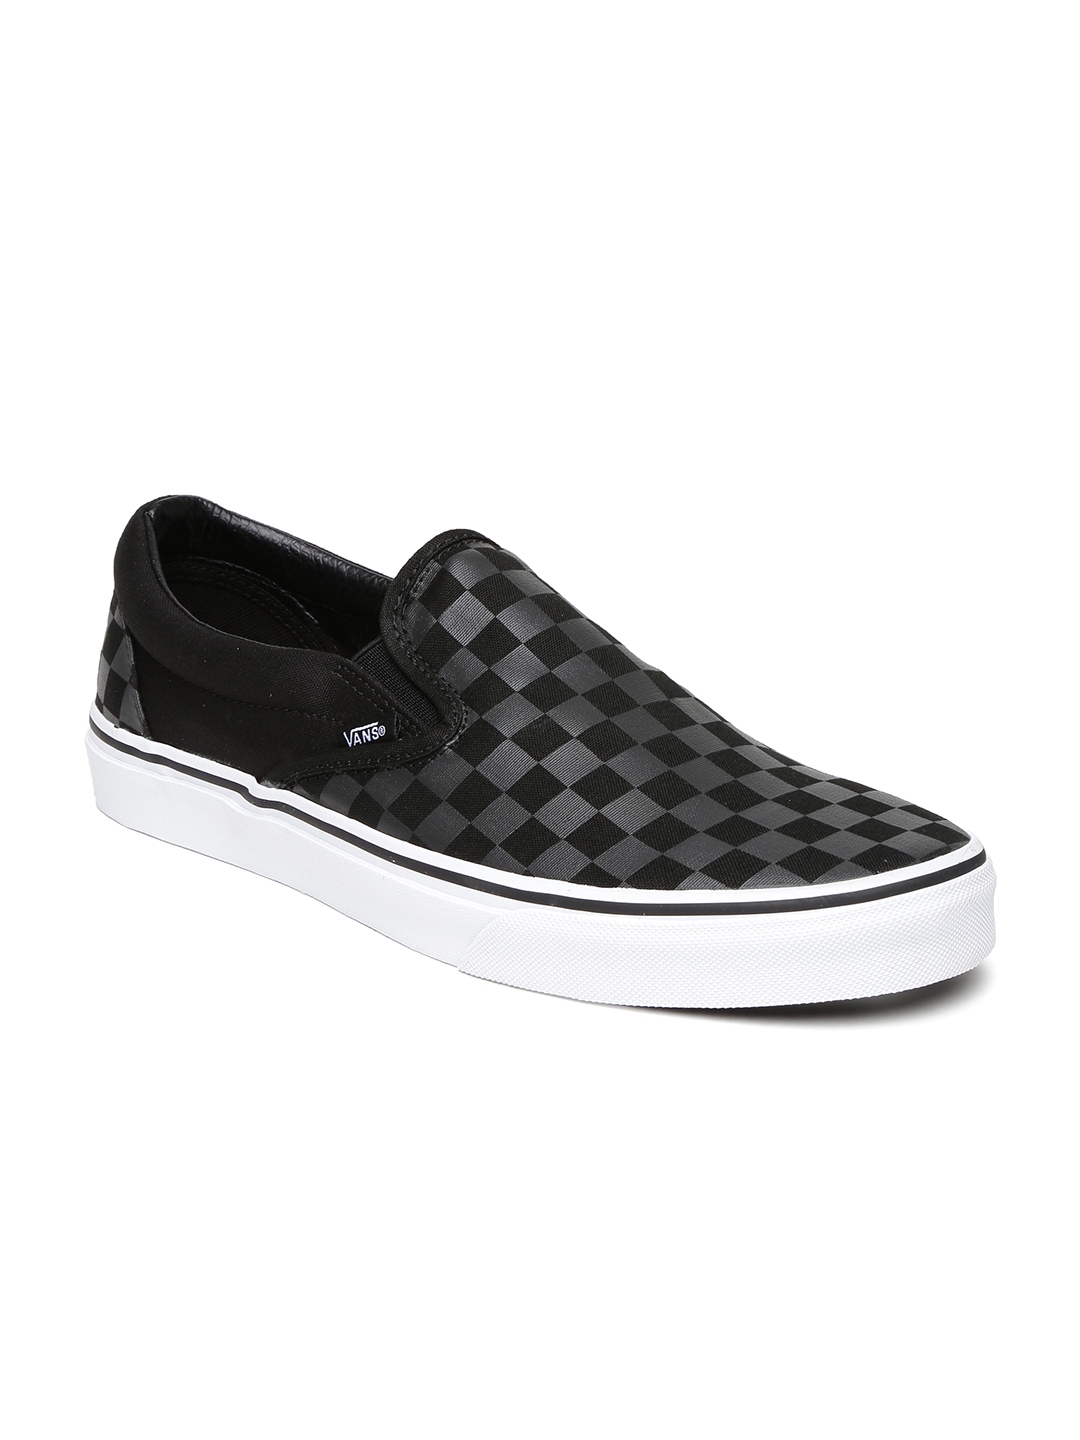 Buy Vans Men Black & Grey Checked Classic Loafers - Casual Shoes for Unisex  1192529 | Myntra